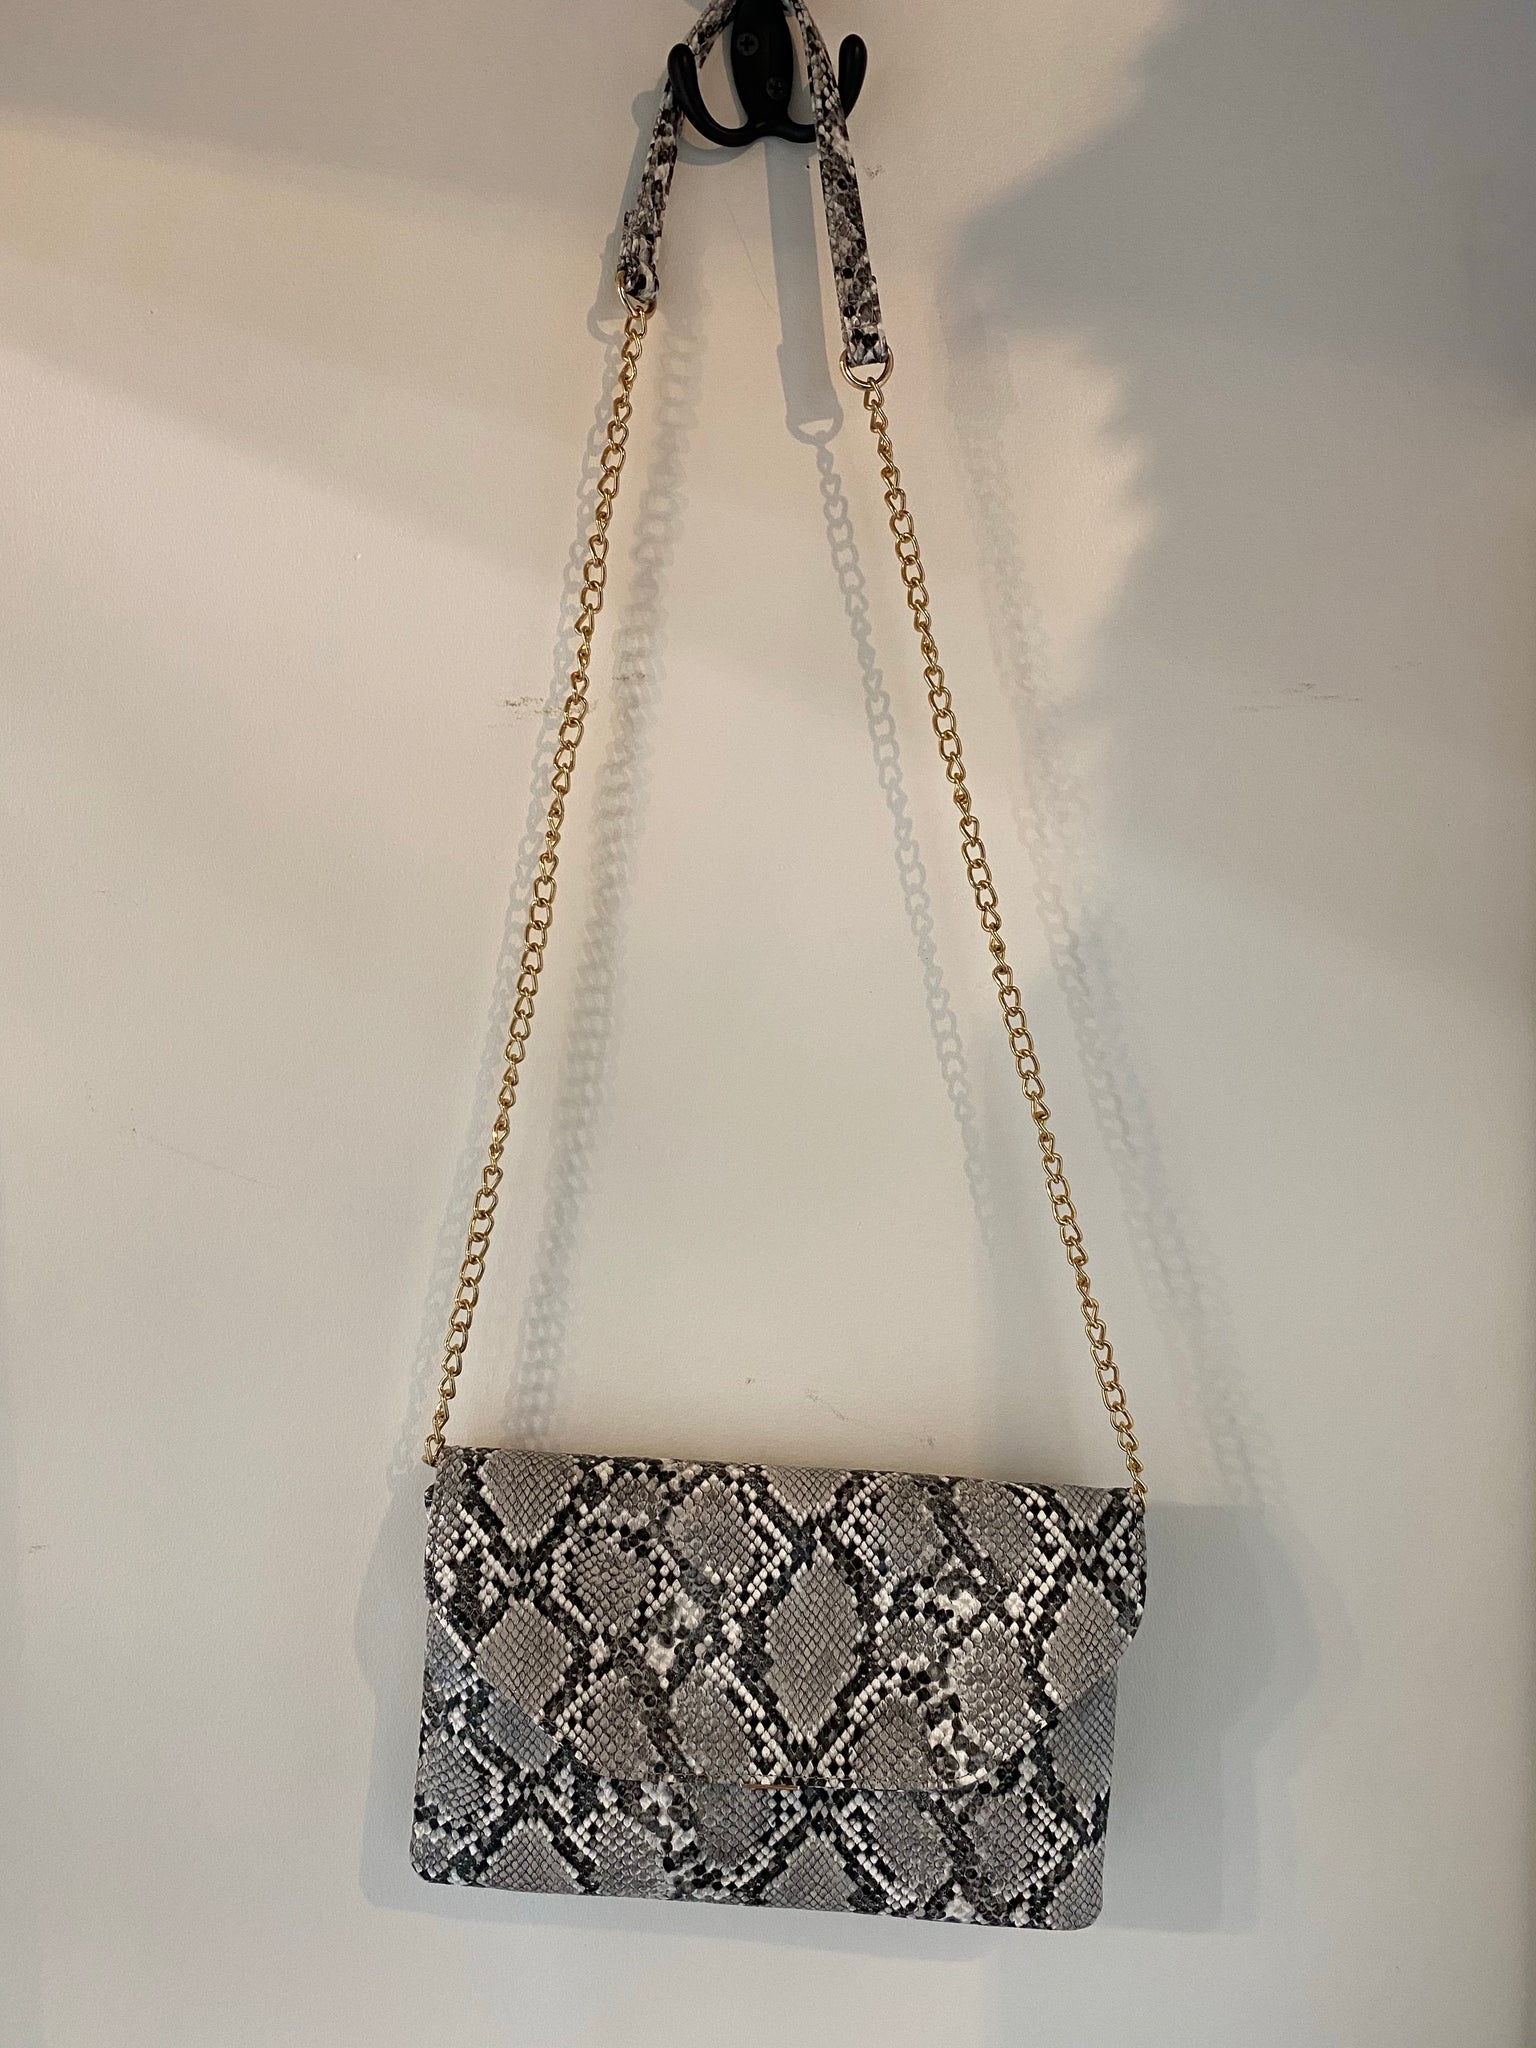 Snakeskin purse with gold chain